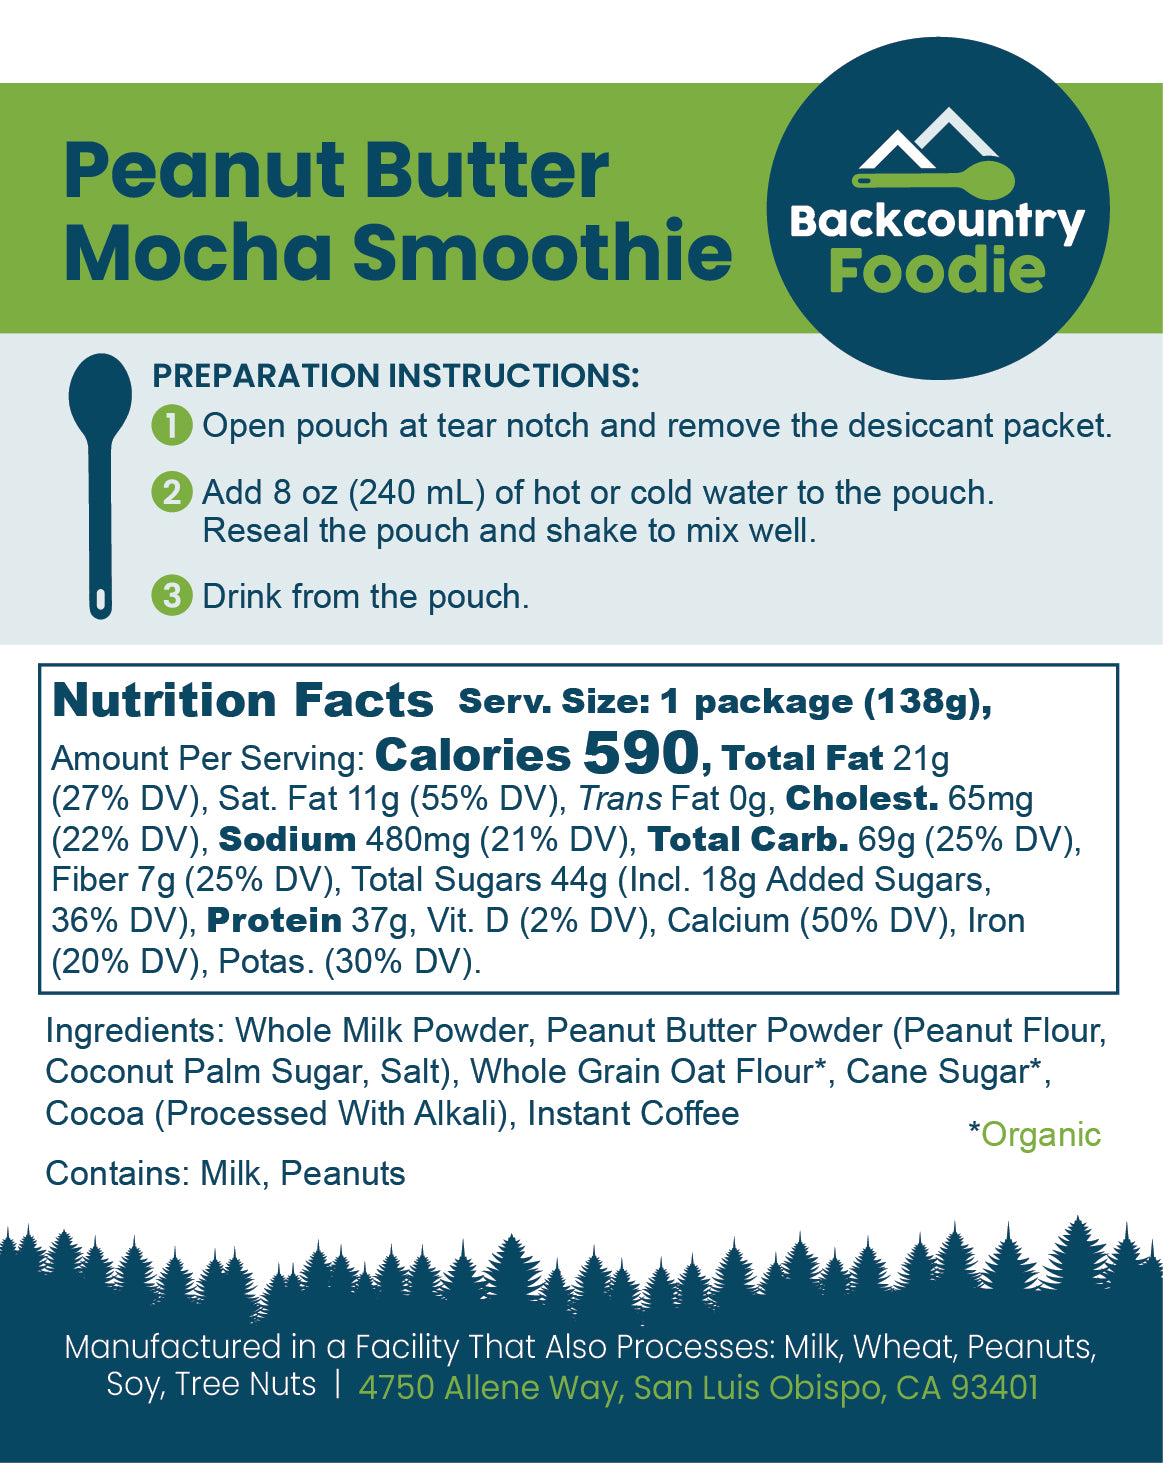 Backcountry Foodie - Peanut Butter Mocha Smoothie